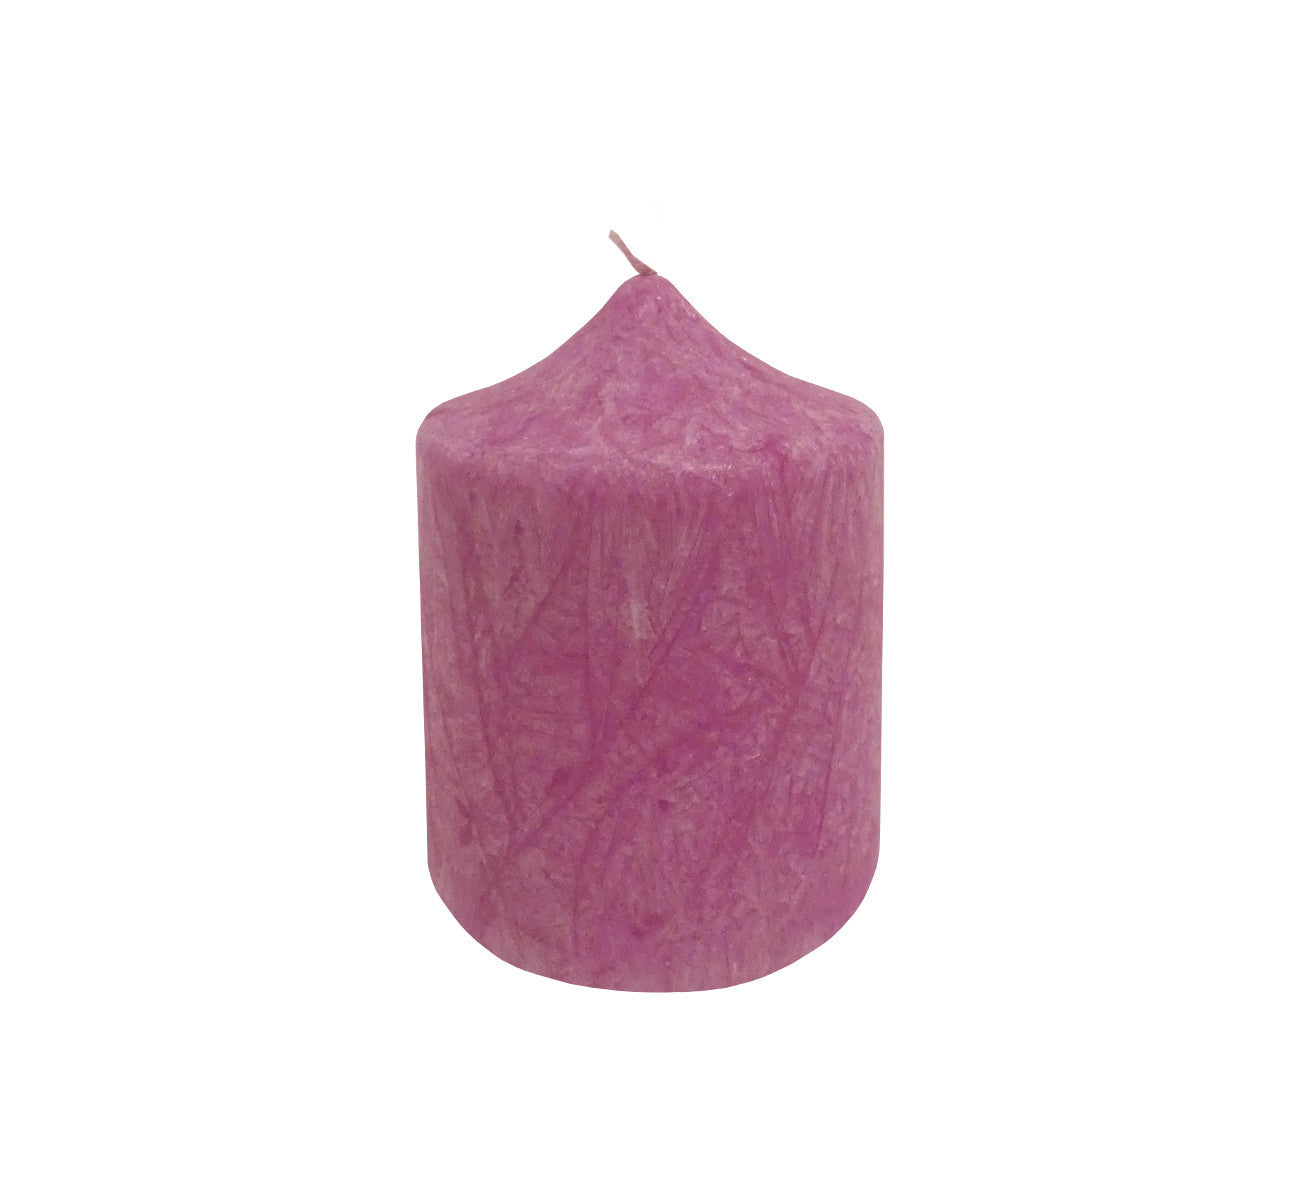 NATURAL OLIVE OIL STEARIN PILLAR CANDLE, HANDMADE VEGAN - SMALL VIOLET